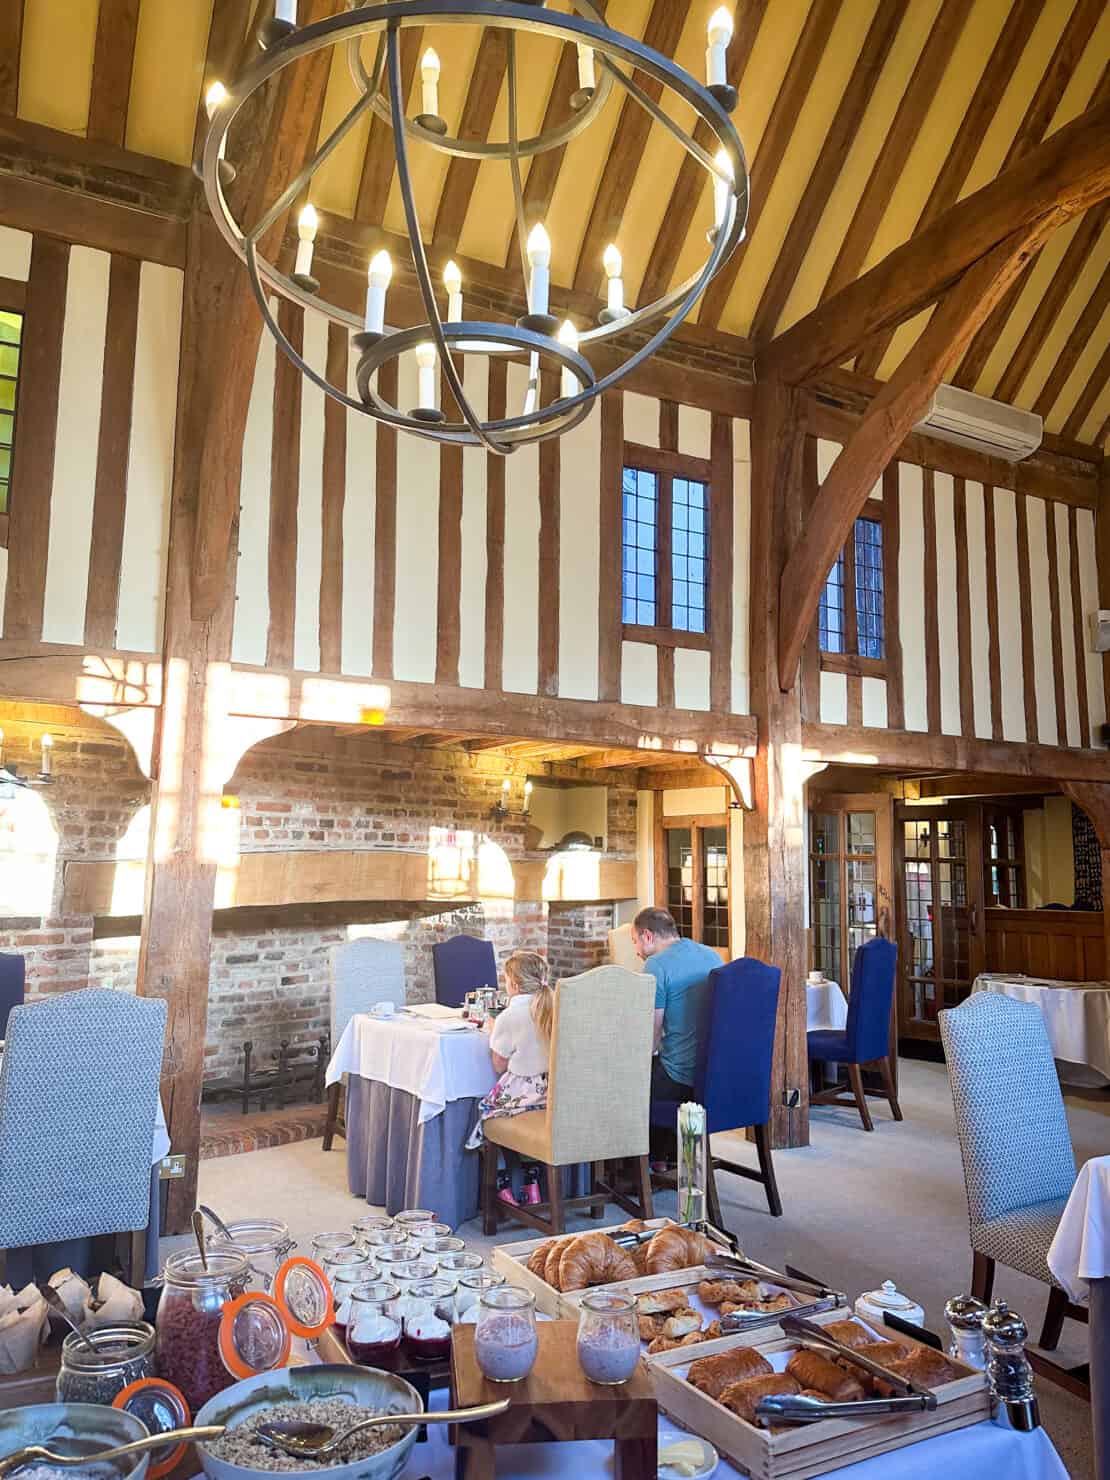 Breakfast in the main hall in the Swan in Lavenham England